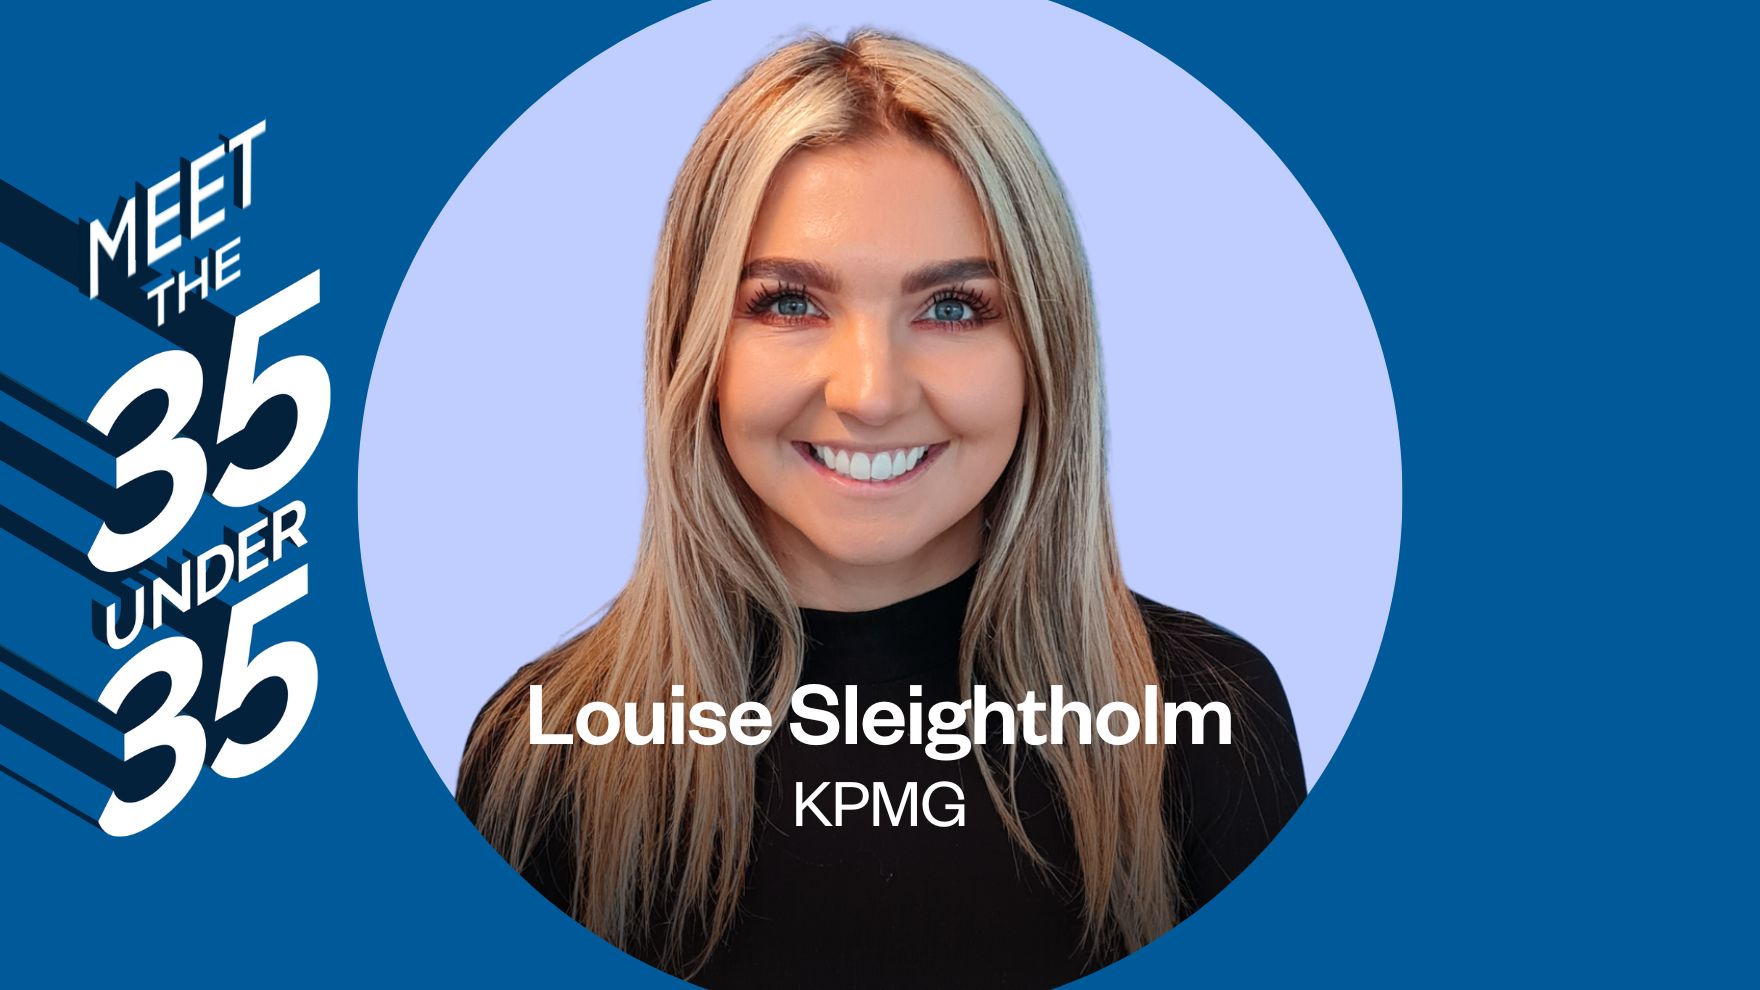 Meet the 35 under 35 Q&A with Louise Sleightholm from KPMG front cover